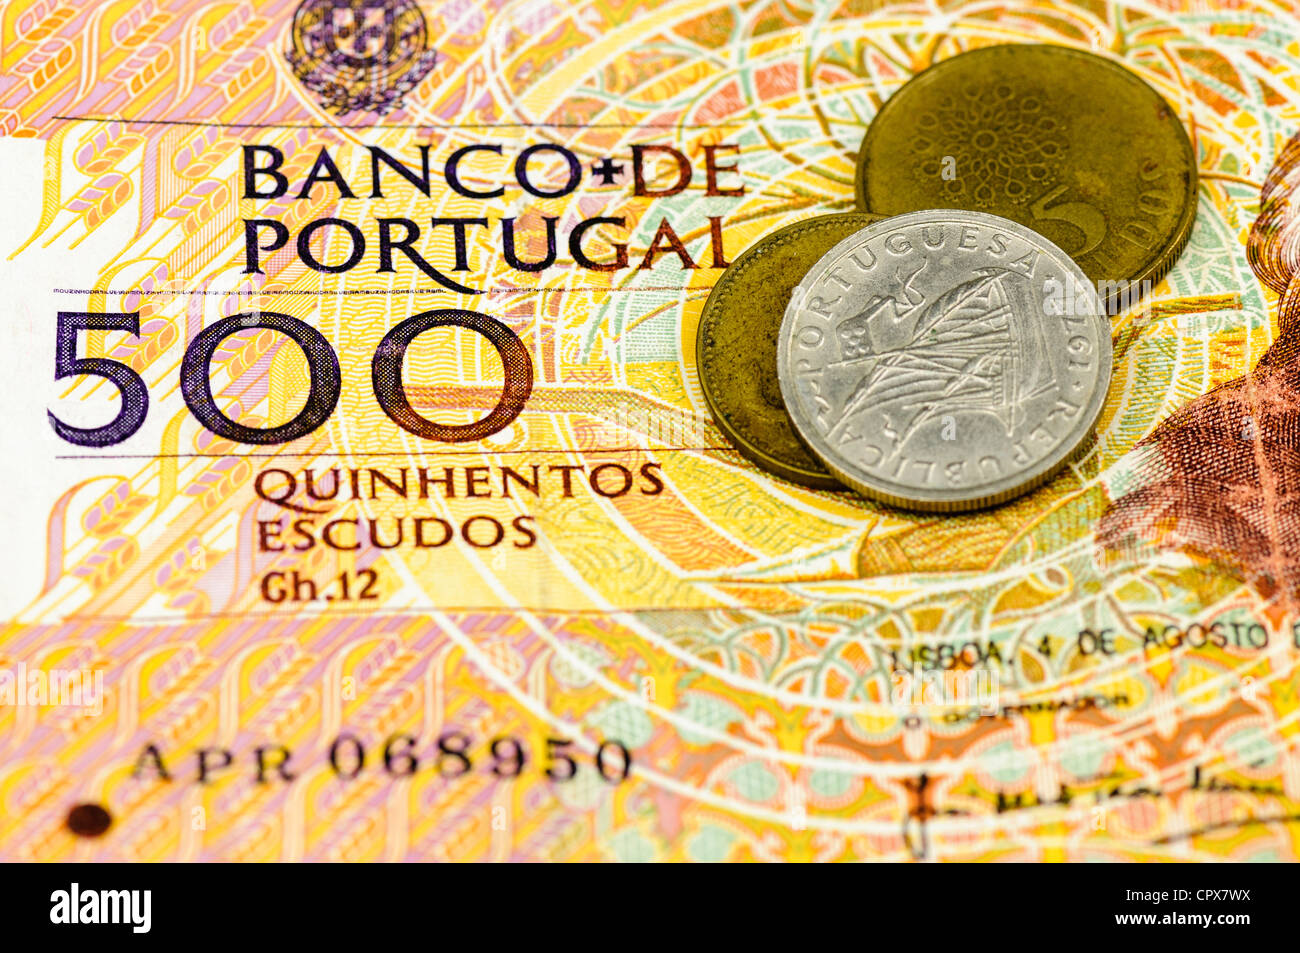 Portugese escudos bank note and coins Stock Photo